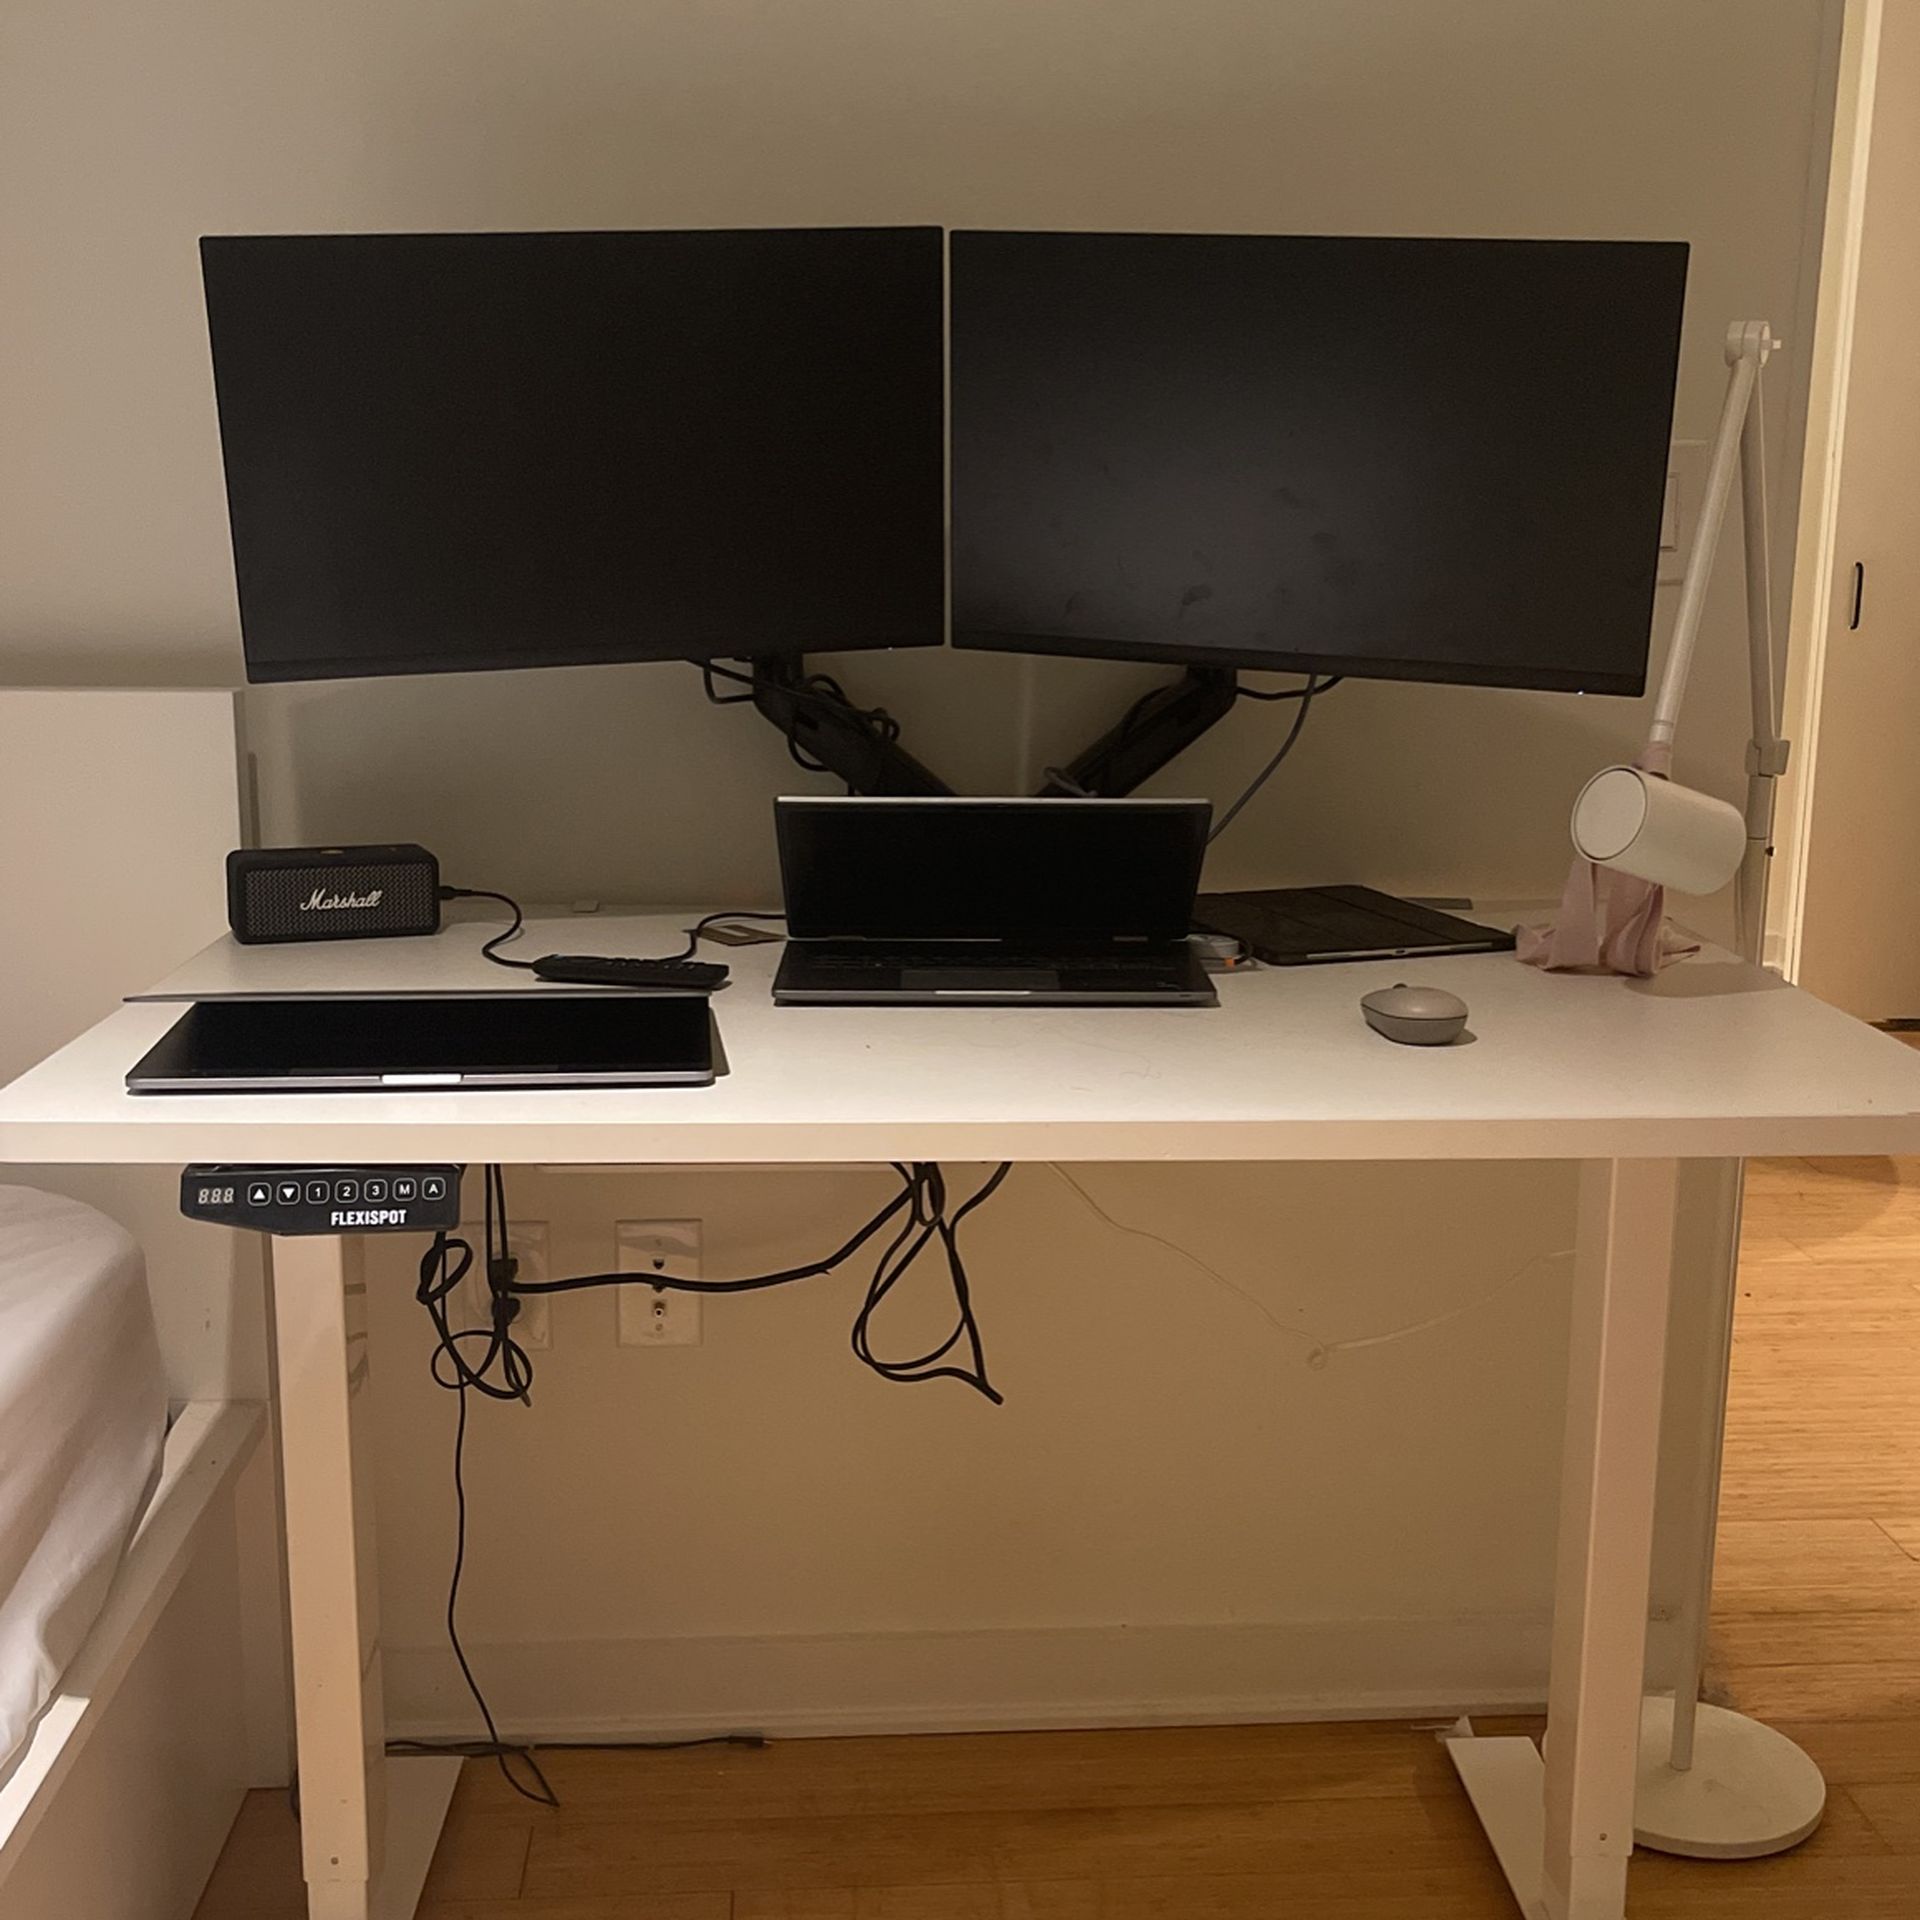 Dual Dell 24 inch Monitor with monitor arm